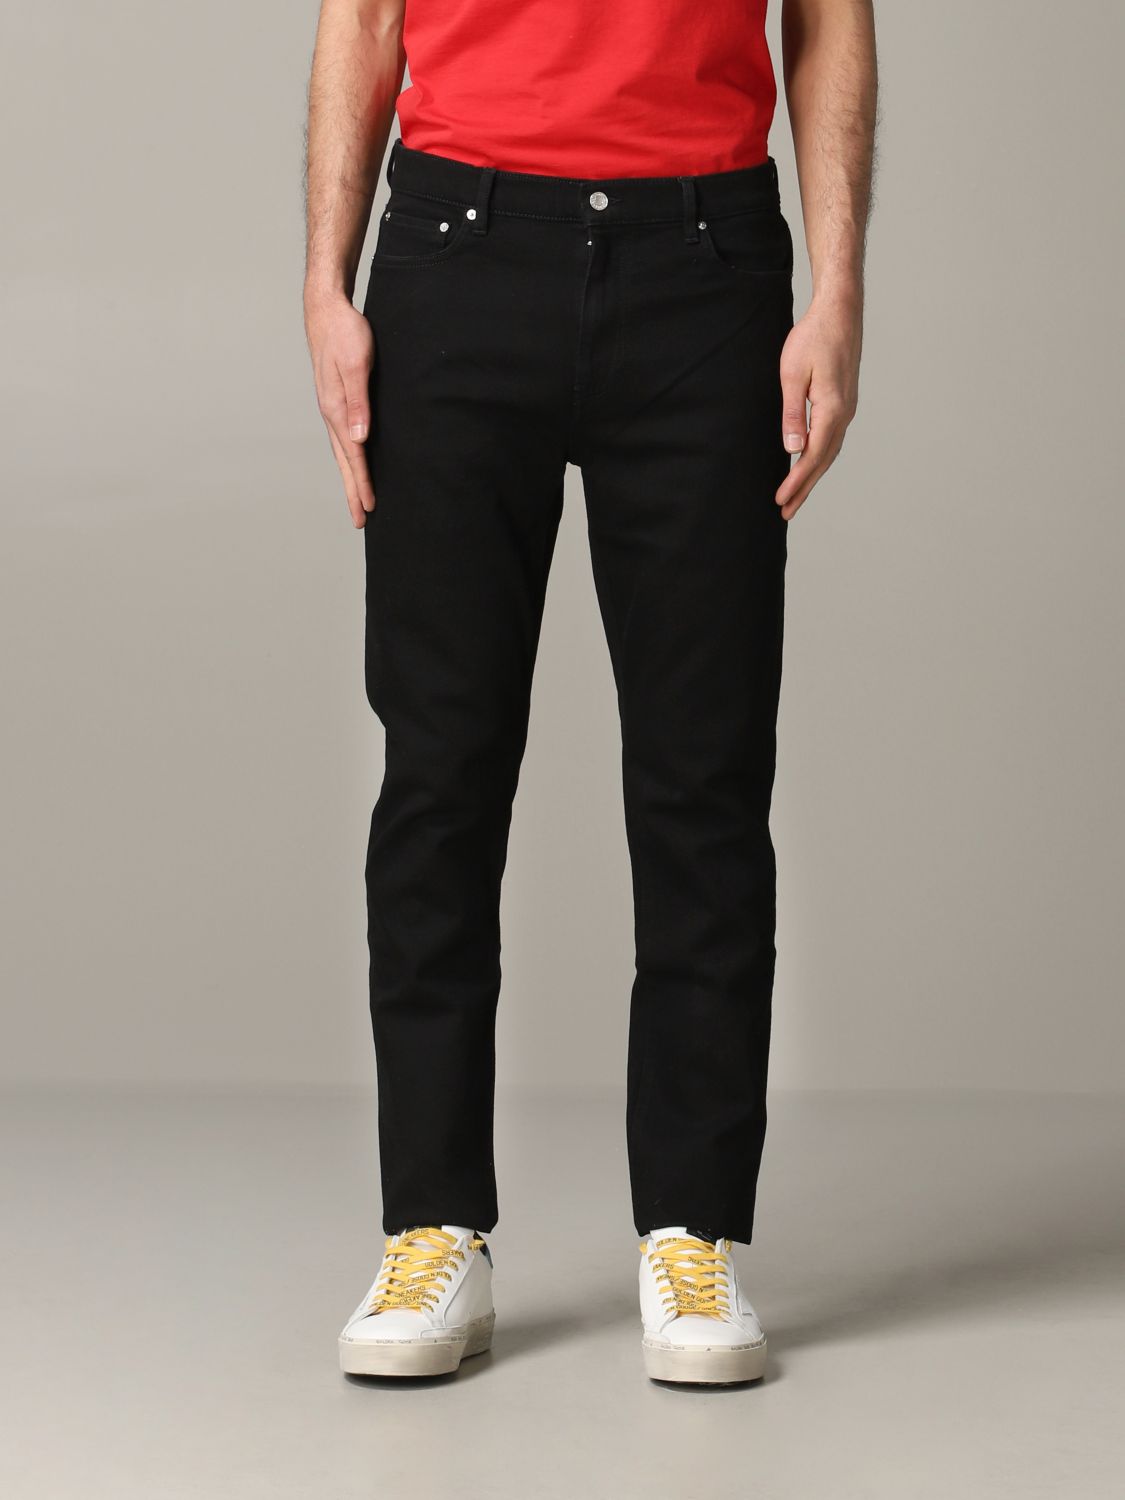 Kenzo Outlet: 5-pocket jeans - Black | Jeans Kenzo FA55PA5502ED GIGLIO.COM